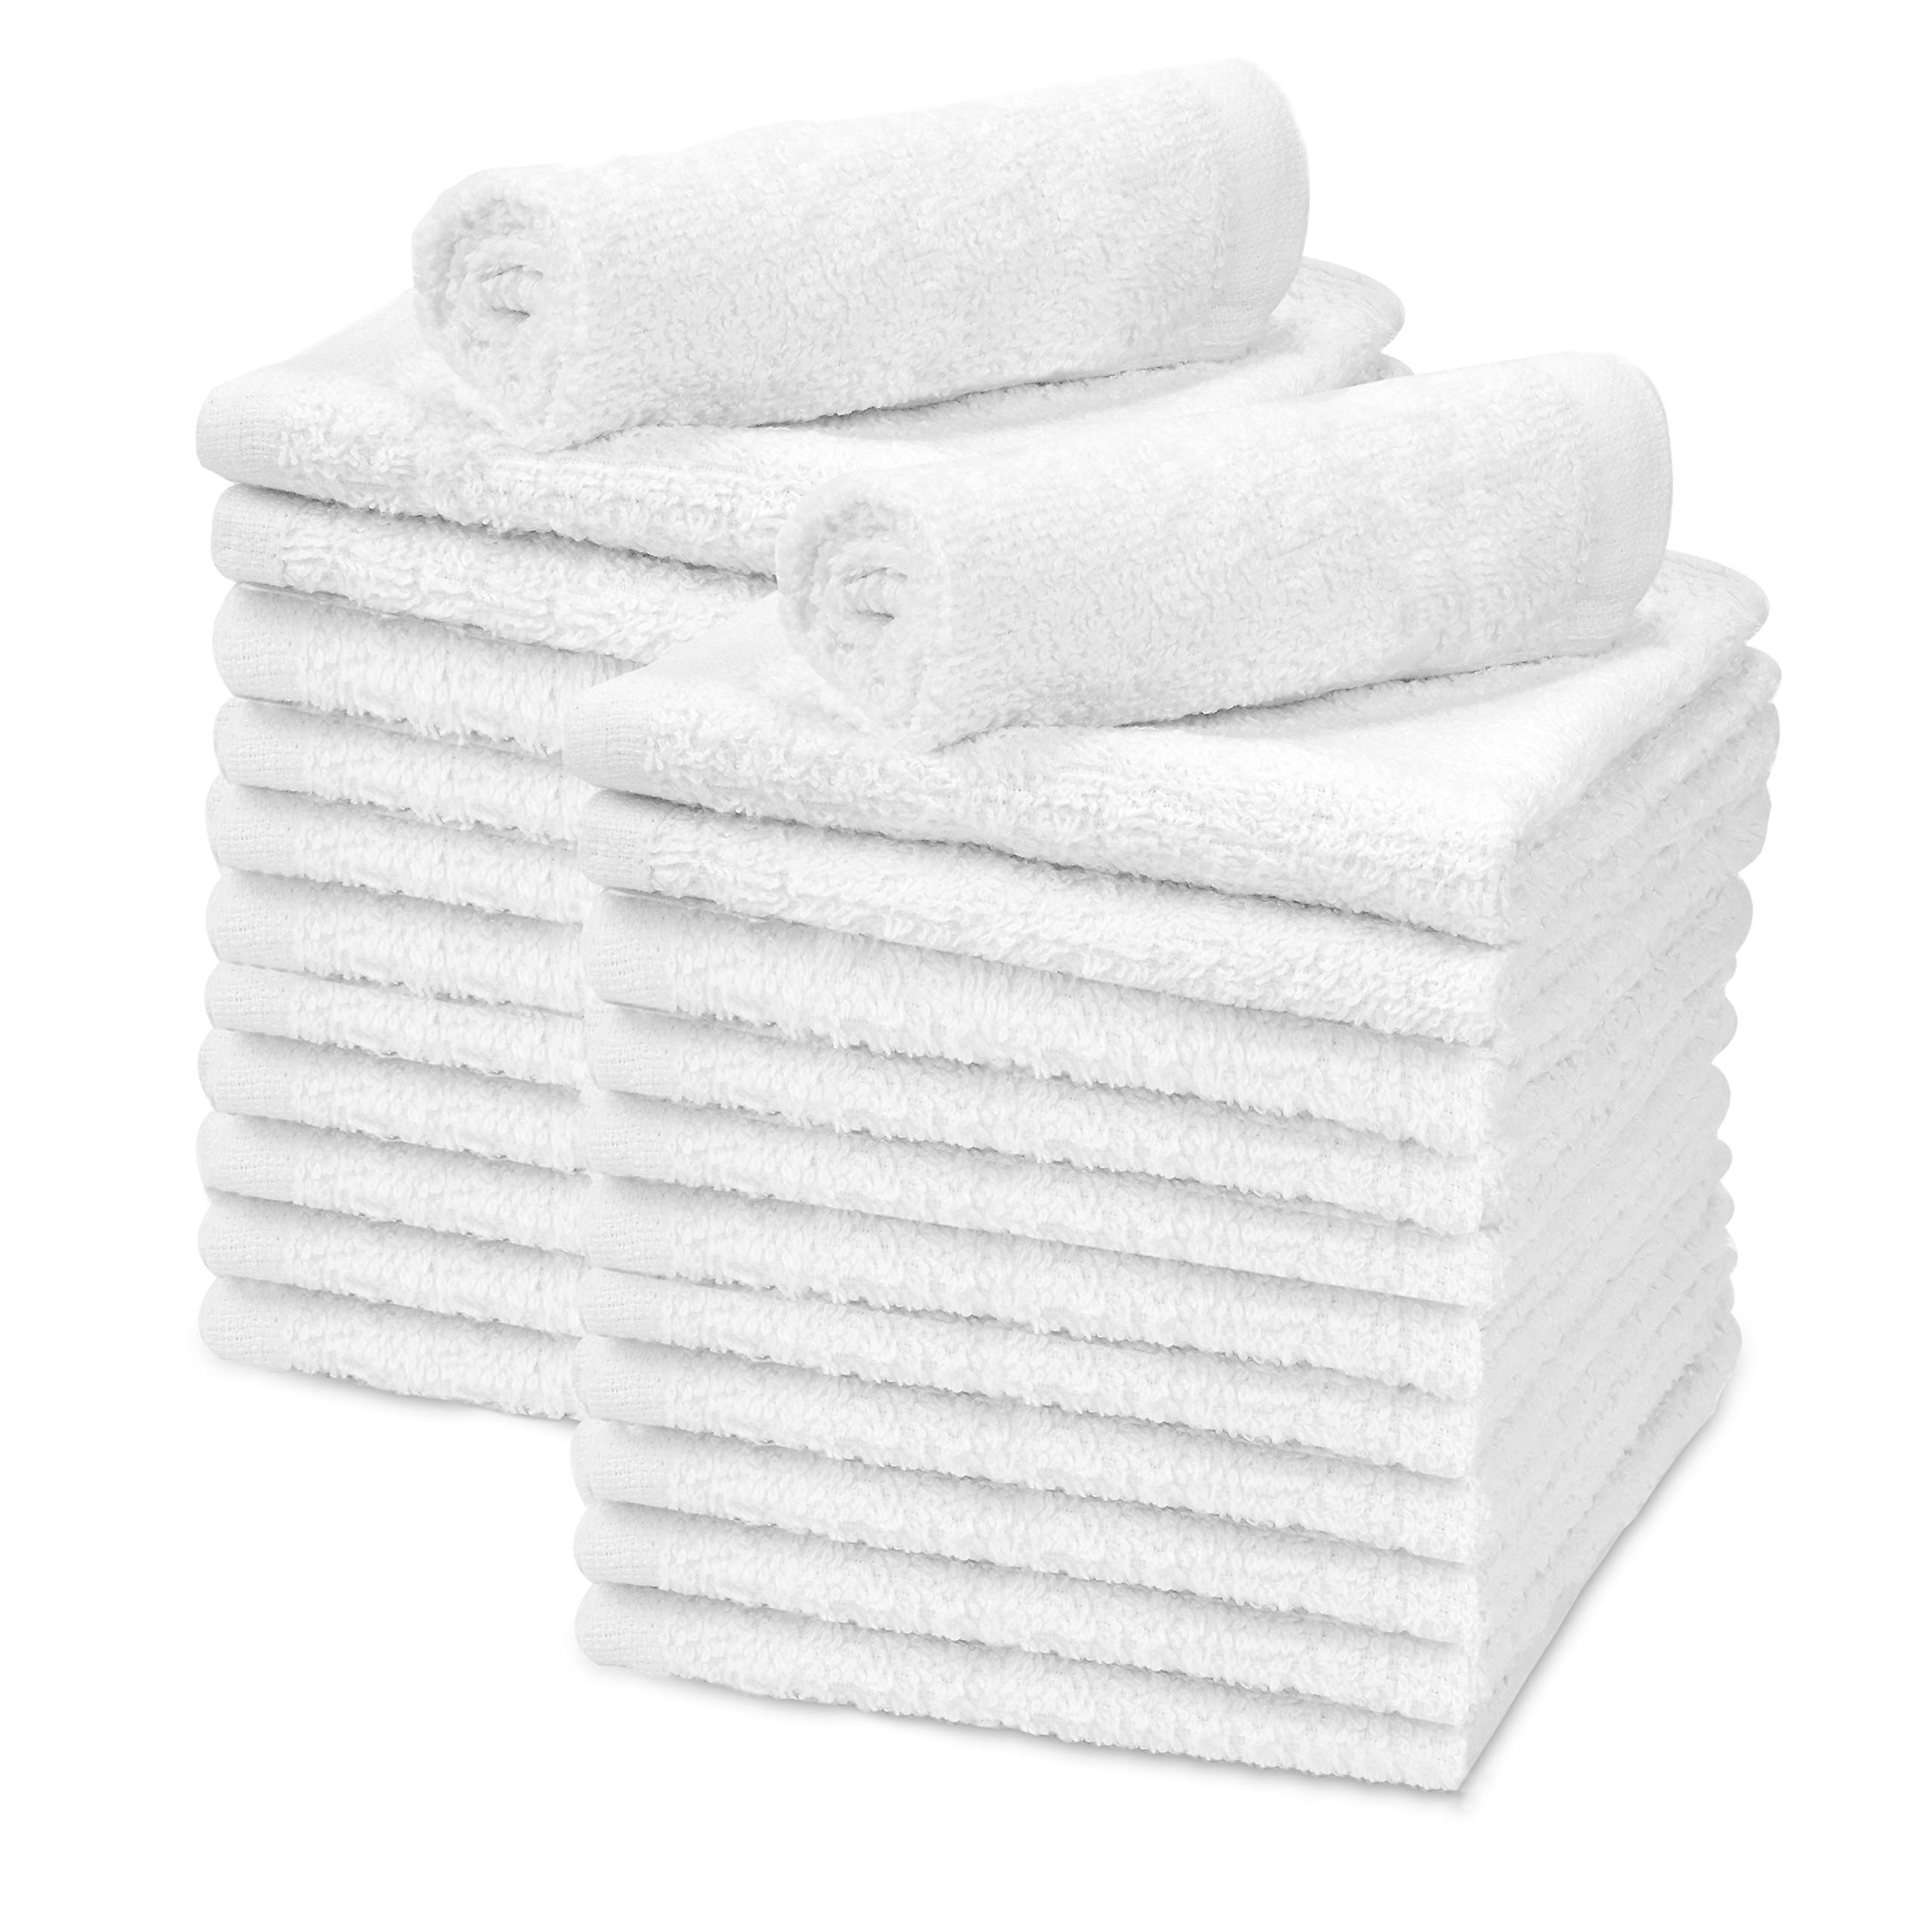 Book Cover TALVANIA White Cotton Washcloths - Pack of 24 - Super Absorbent Bathroom Face Towels - 12